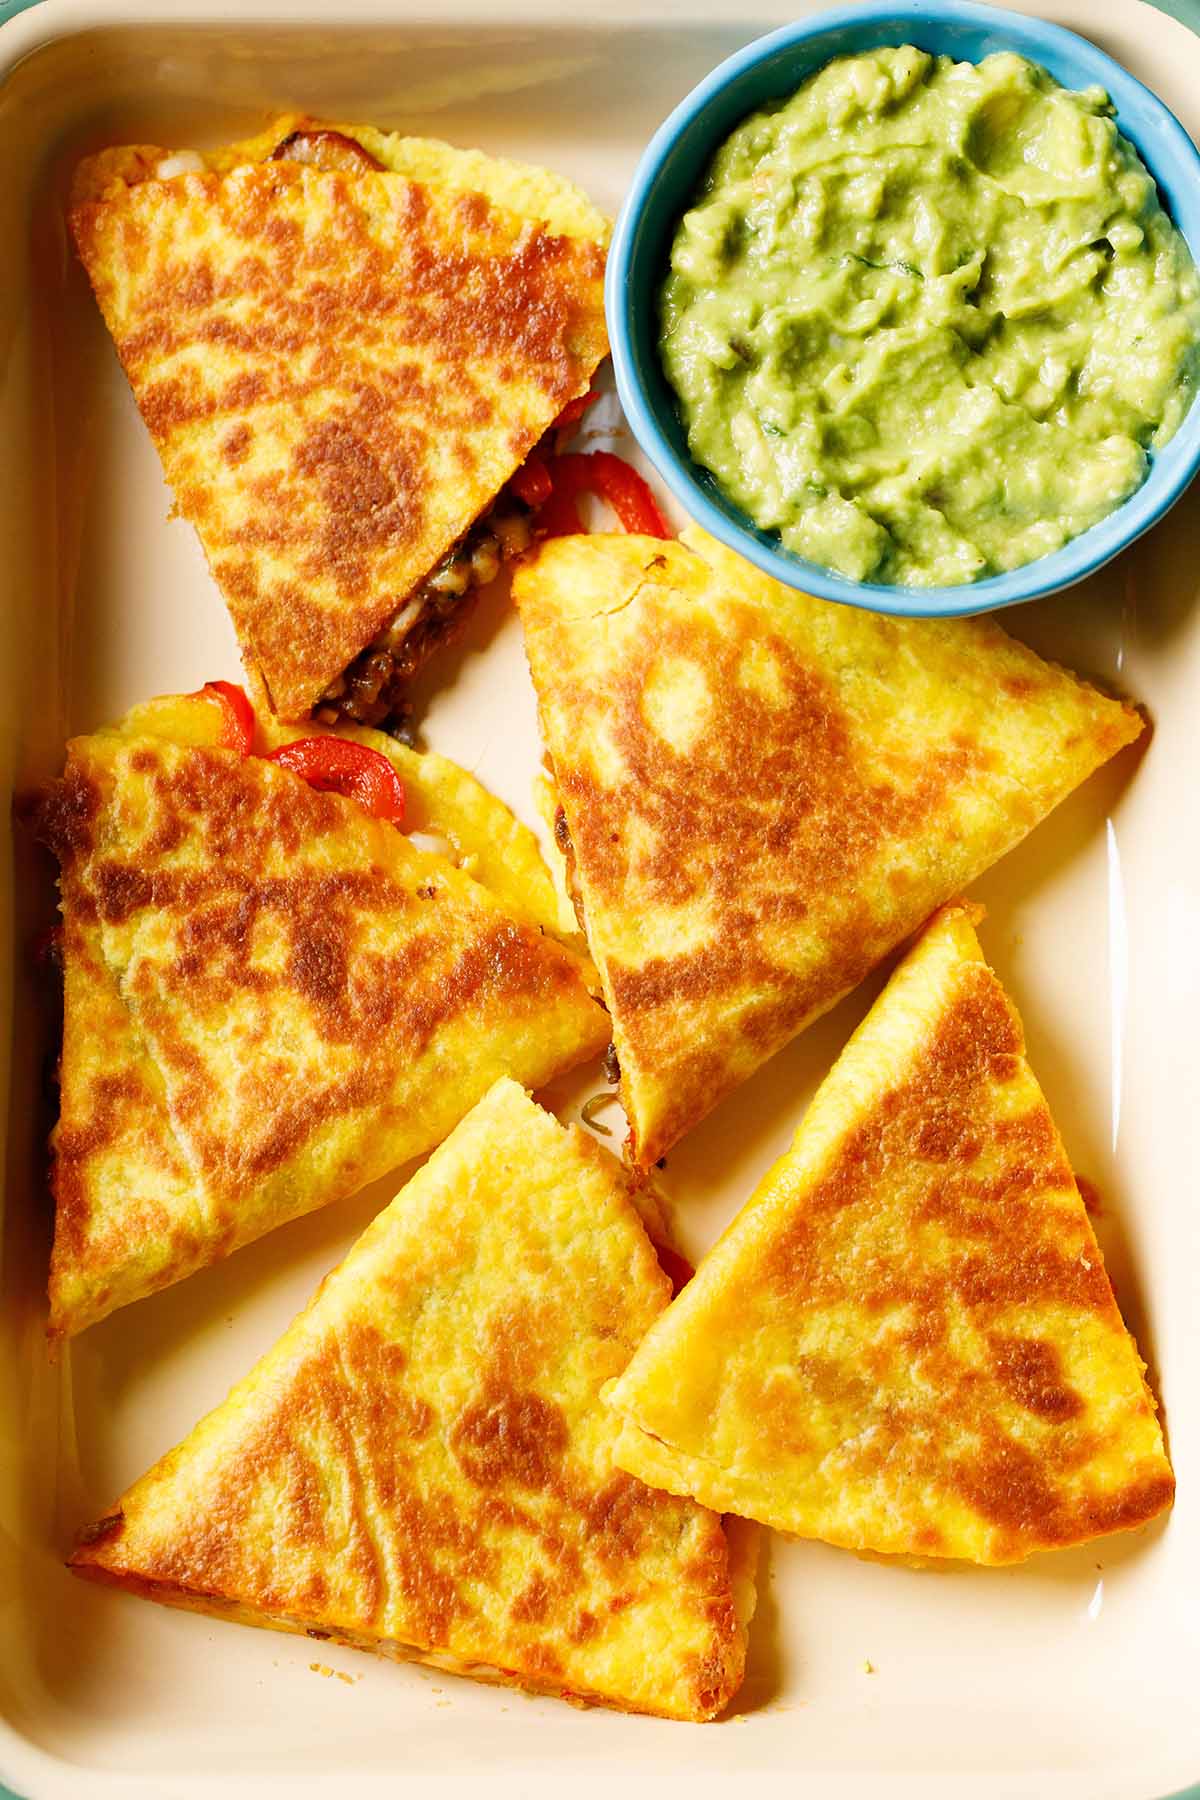 quesadilla triangles served in a tray with a side of guacamole in a blue bowl.